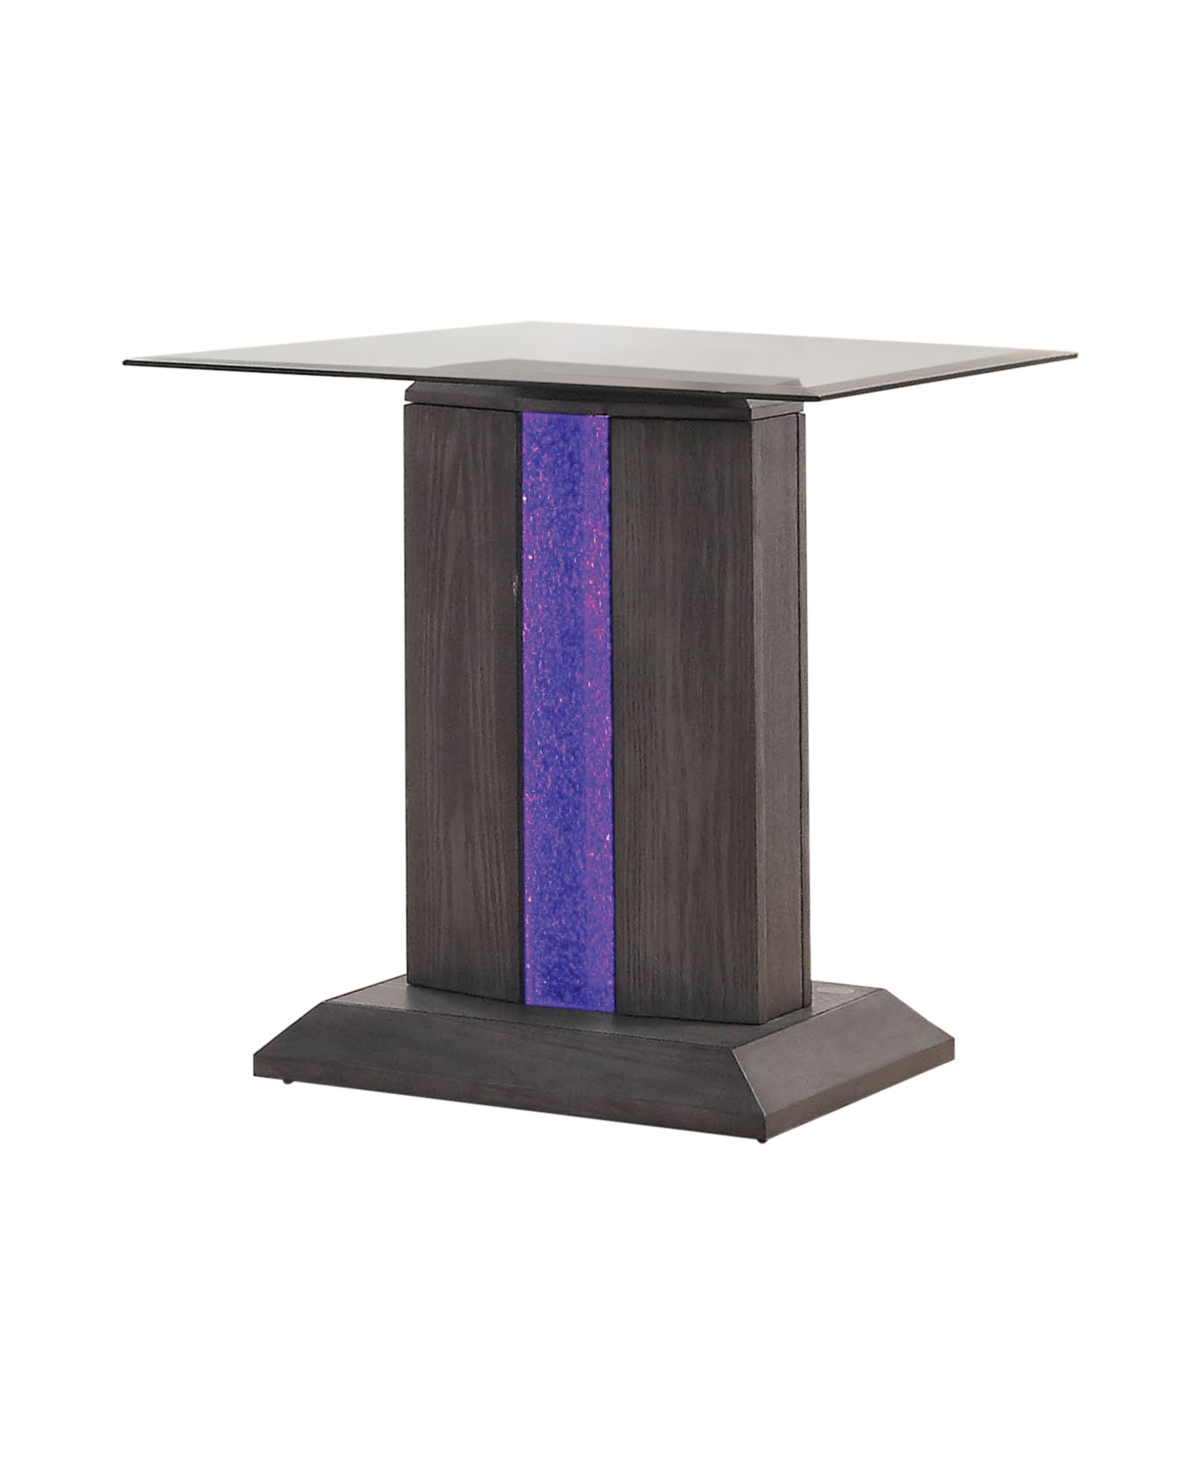 of America Aricelle Led Lights End Table